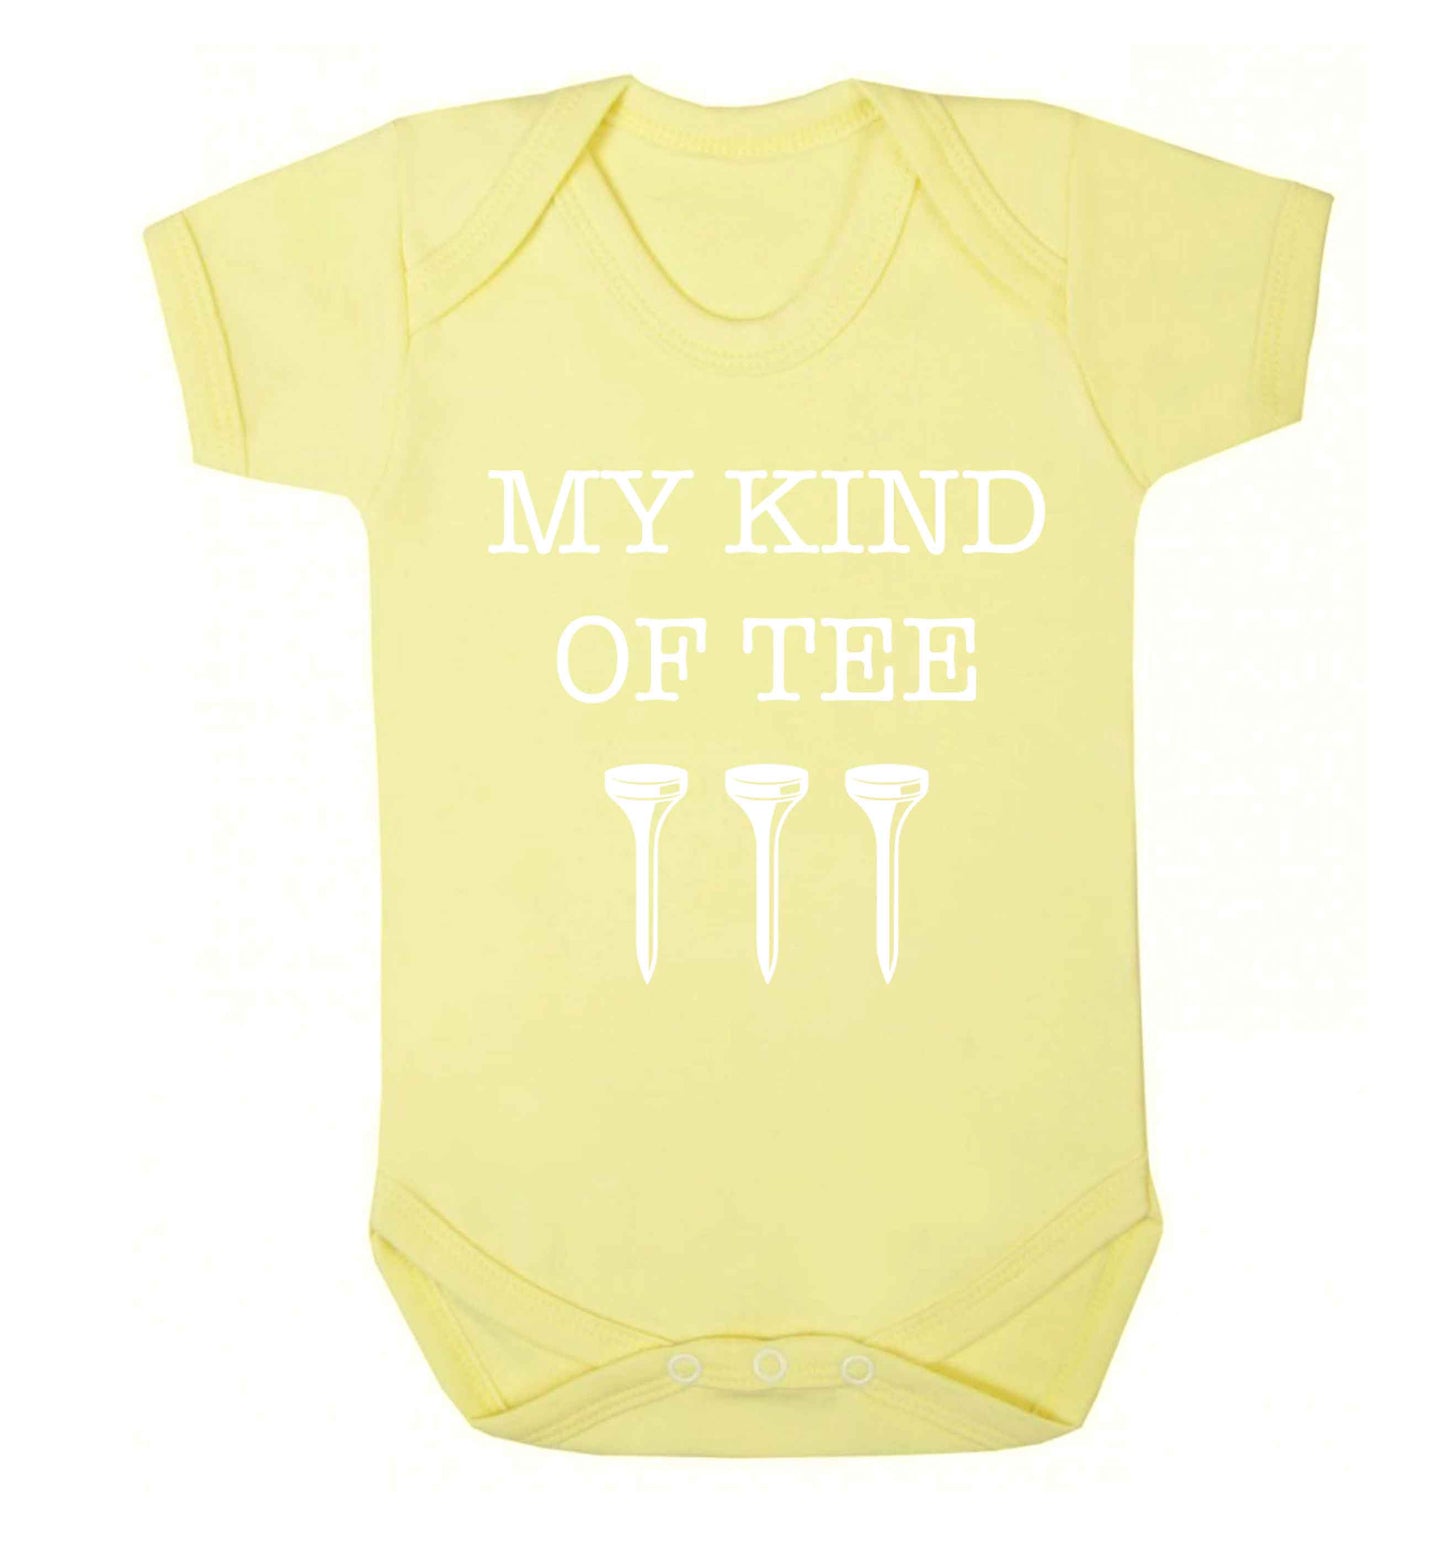 My kind of tee Baby Vest pale yellow 18-24 months